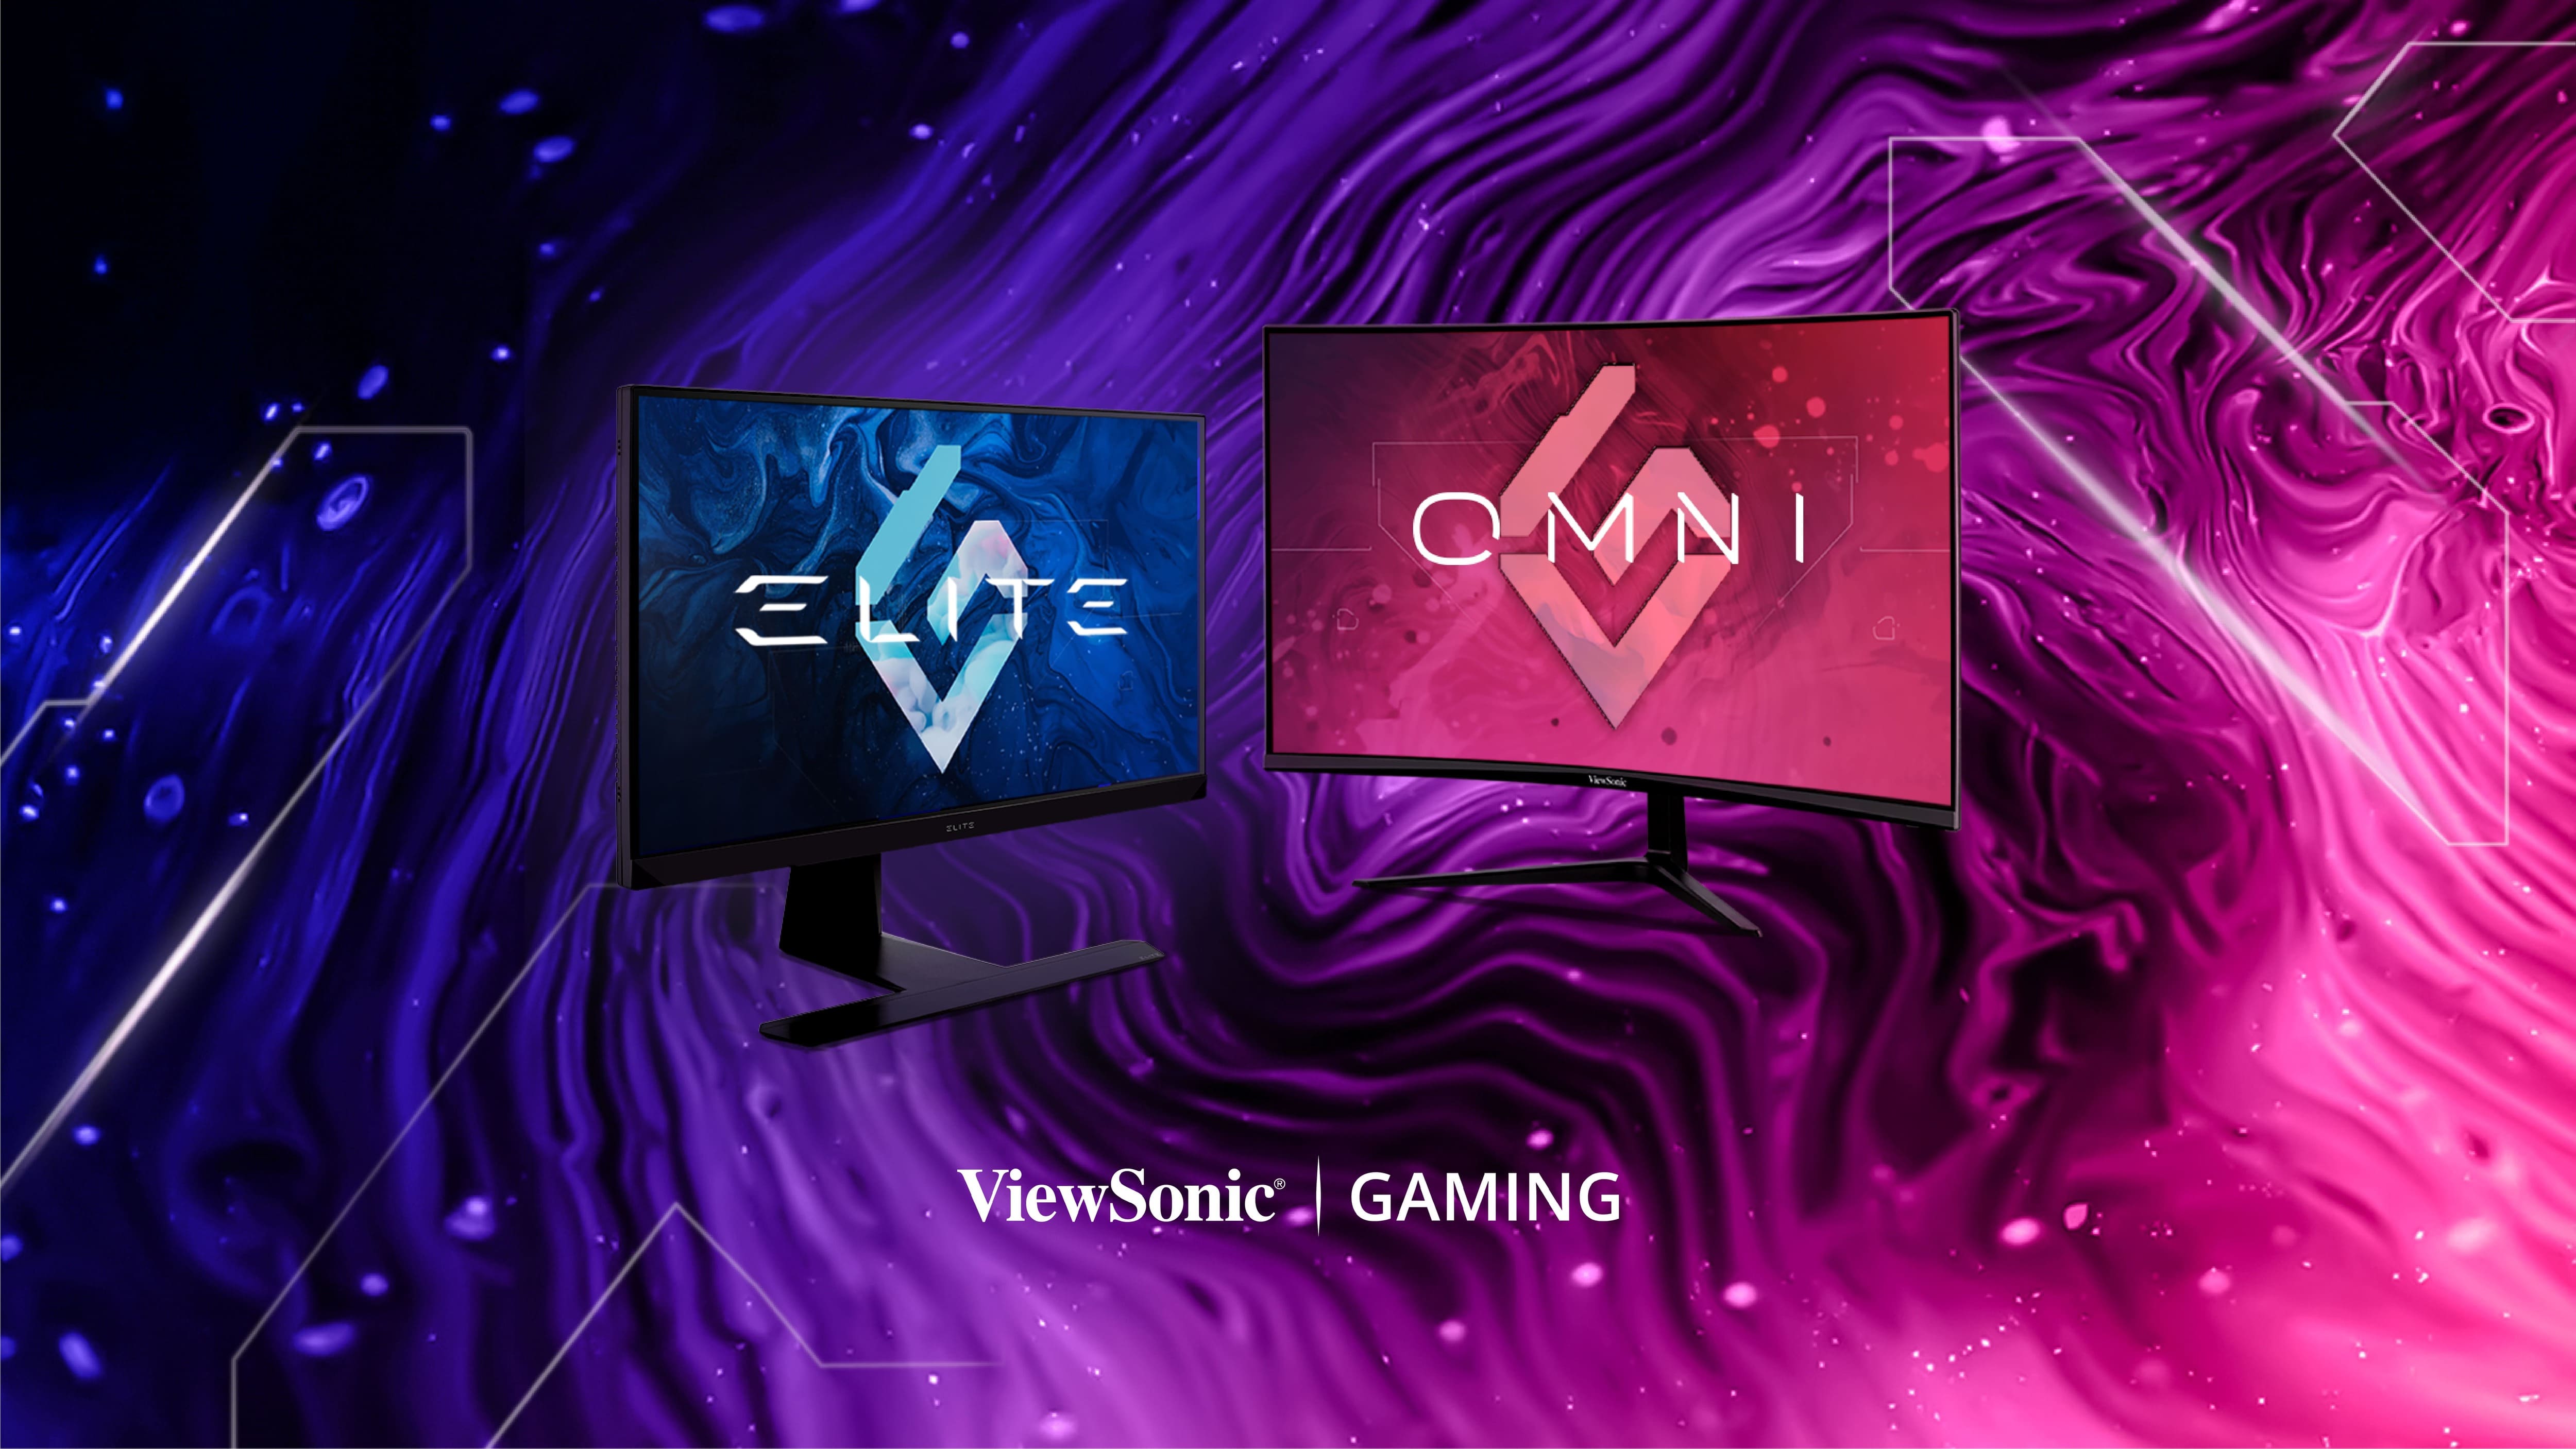 ViewSonic delivers innovative products to meet the diverse needs of the gaming community.